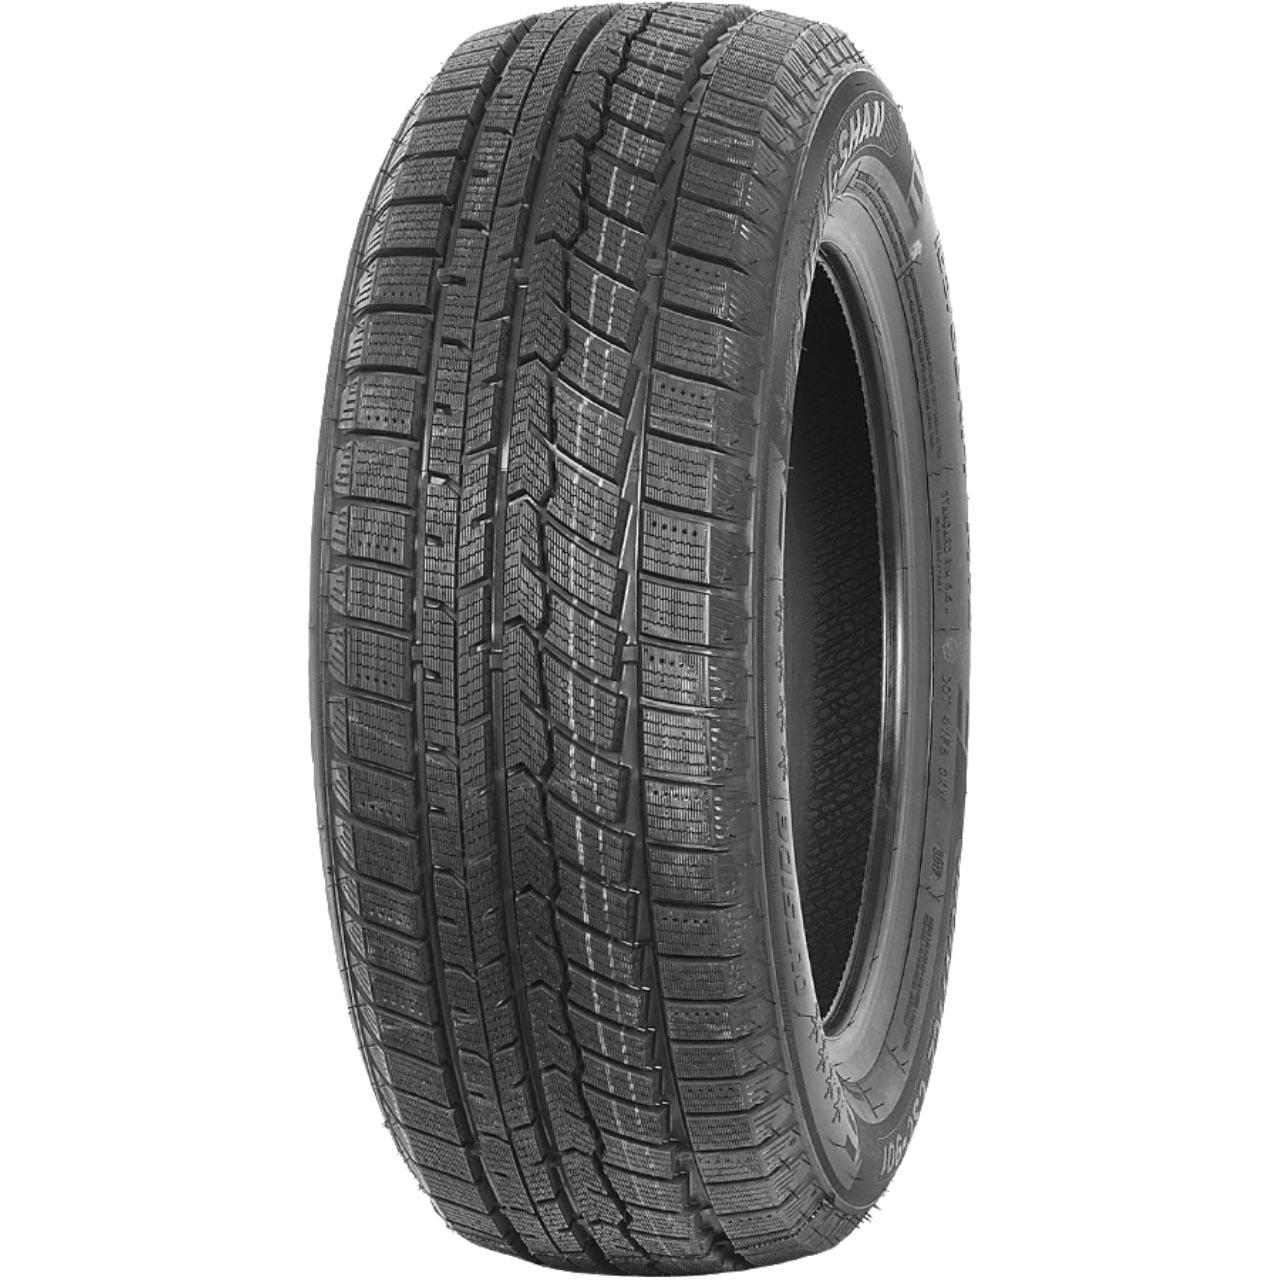 CHENGSHAN MONTICE CSC-901 205/45R17 88V BSW